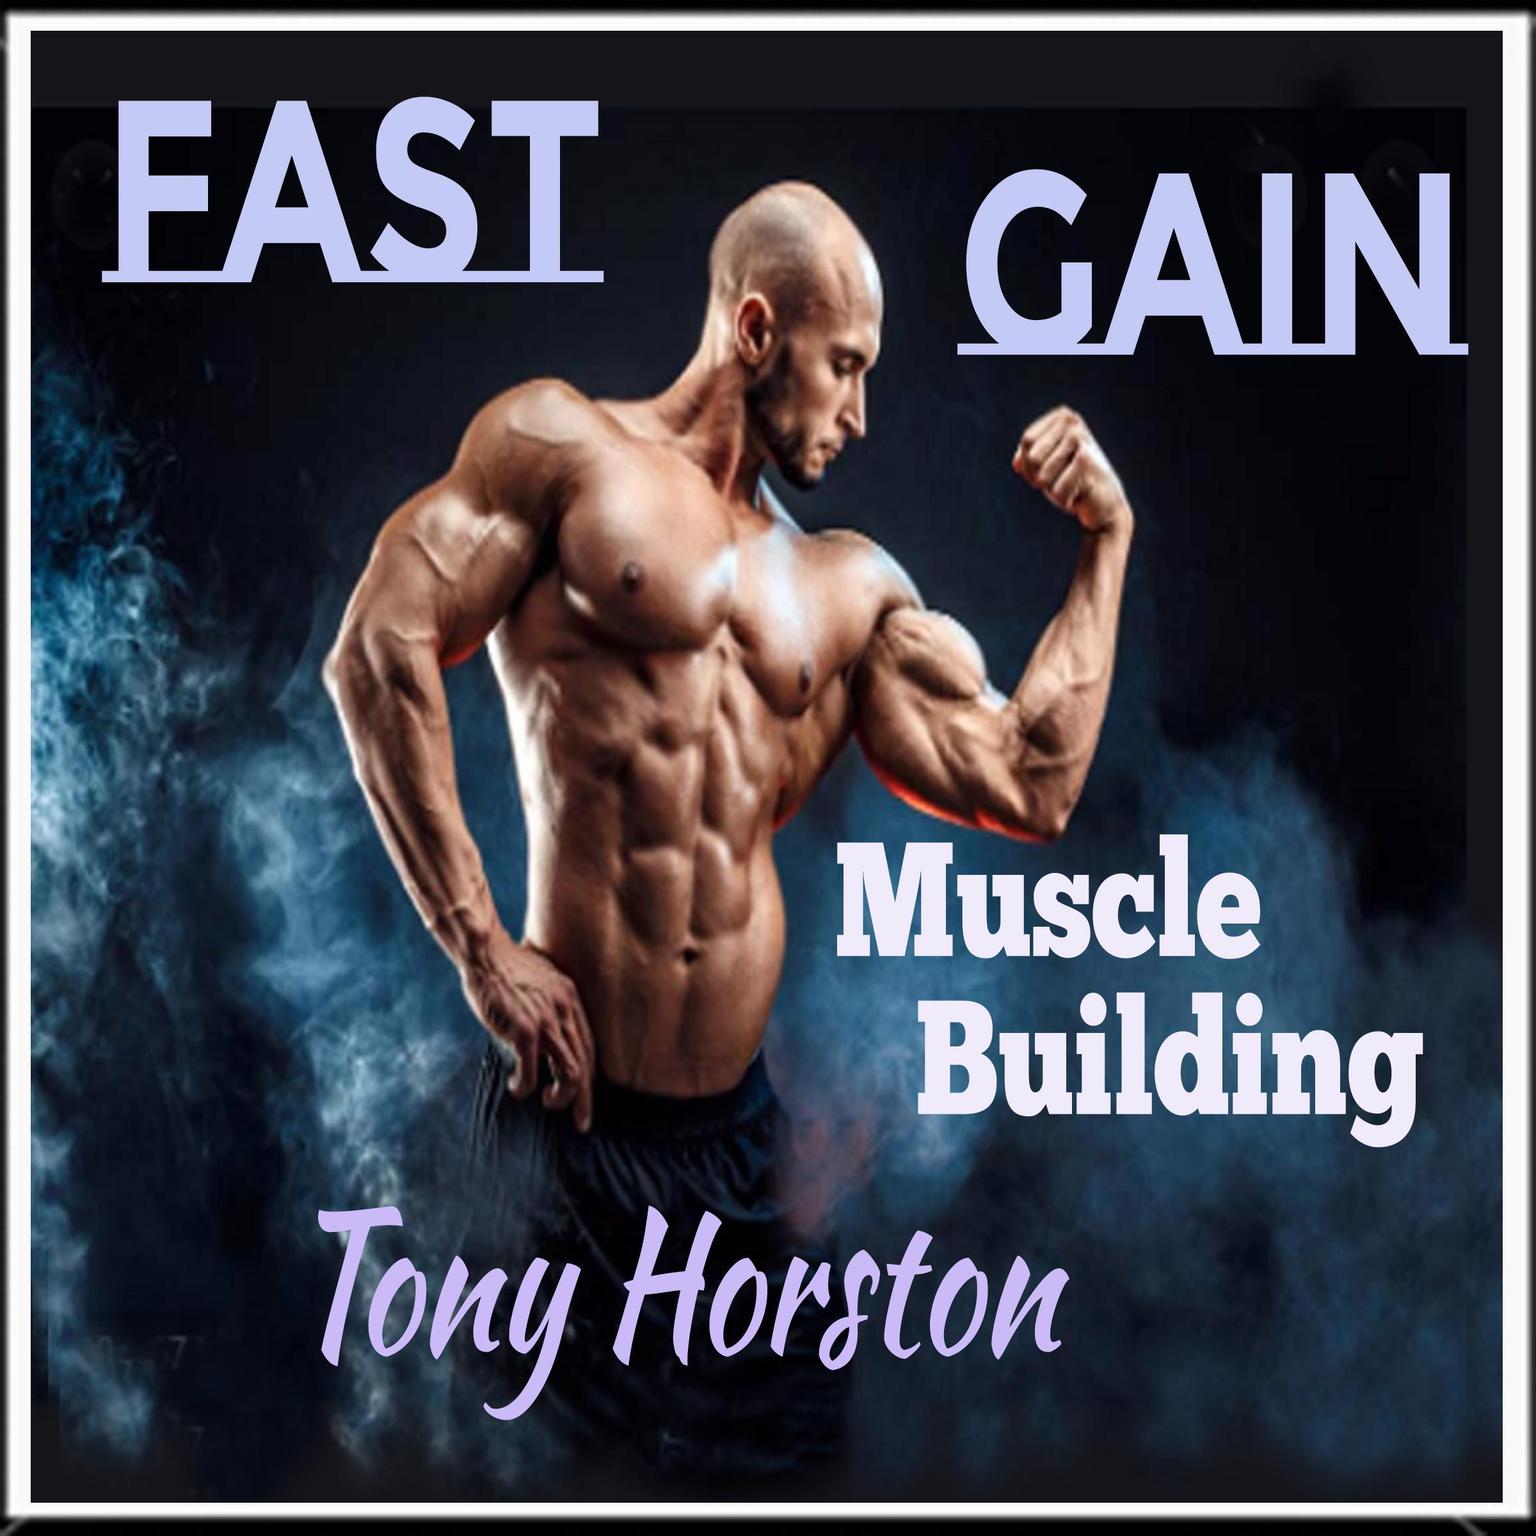 Fast Gain Muscle Building Audiobook, by Tony Horston